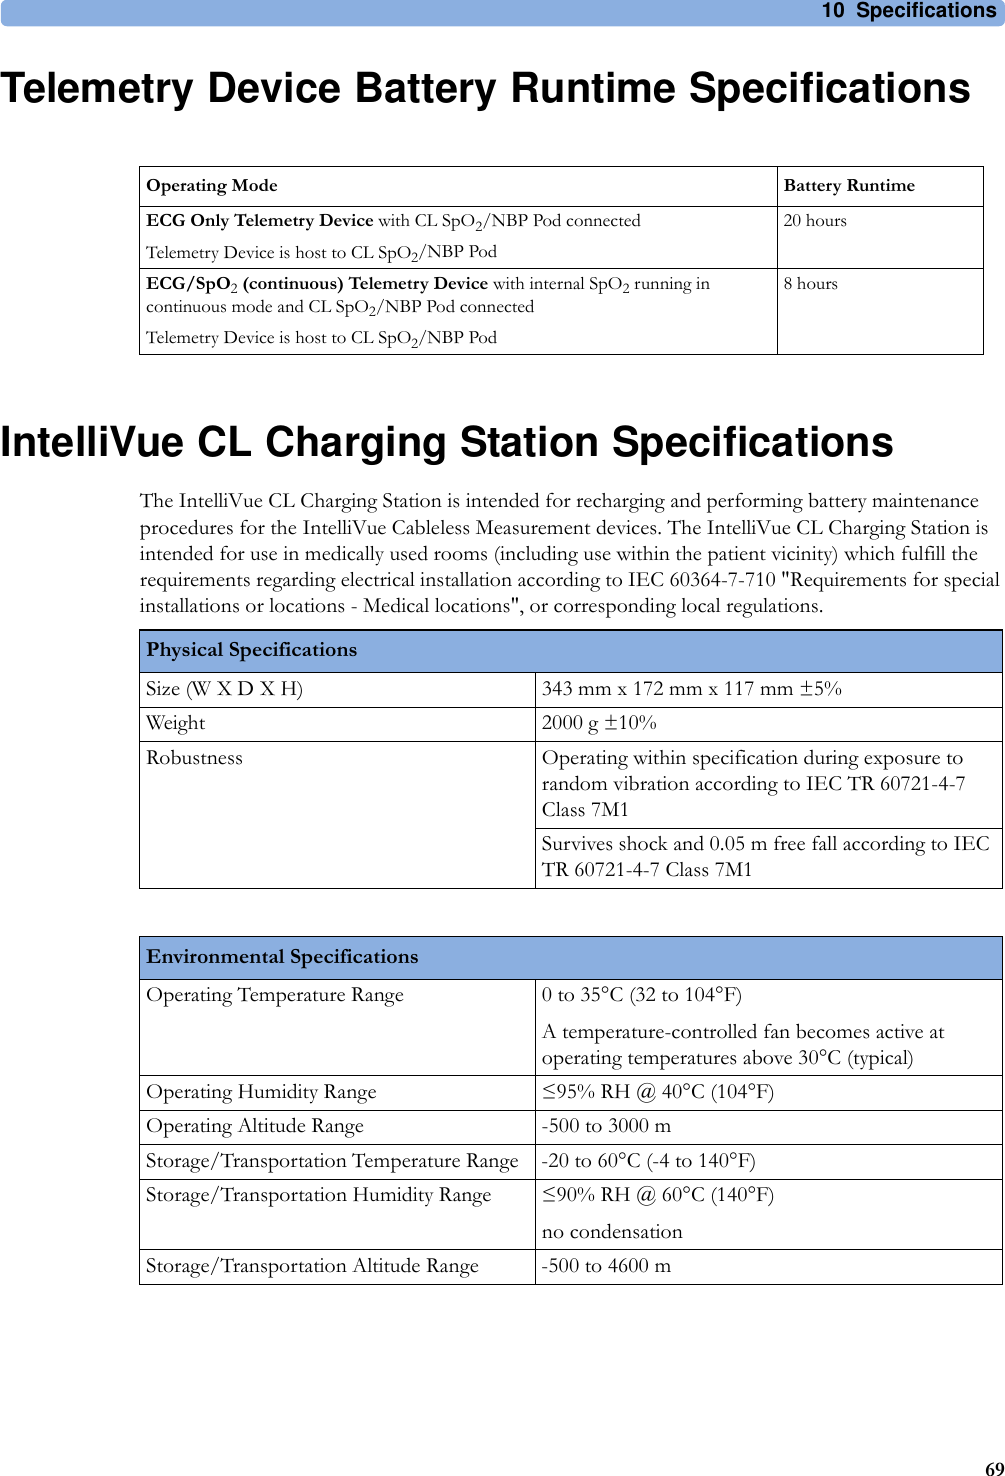 10 Specifications69Telemetry Device Battery Runtime SpecificationsIntelliVue CL Charging Station SpecificationsThe IntelliVue CL Charging Station is intended for recharging and performing battery maintenance procedures for the IntelliVue Cableless Measurement devices. The IntelliVue CL Charging Station is intended for use in medically used rooms (including use within the patient vicinity) which fulfill the requirements regarding electrical installation according to IEC 60364-7-710 &quot;Requirements for special installations or locations - Medical locations&quot;, or corresponding local regulations. Operating Mode Battery RuntimeECG Only Telemetry Device with CL SpO2/NBP Pod connectedTelemetry Device is host to CL SpO2/NBP Pod20 hoursECG/SpO2 (continuous) Telemetry Device with internal SpO2 running in continuous mode and CL SpO2/NBP Pod connectedTelemetry Device is host to CL SpO2/NBP Pod8 hoursPhysical SpecificationsSize (W X D X H) 343 mm x 172 mm x 117 mm ±5%Weight 2000 g ±10%Robustness Operating within specification during exposure to random vibration according to IEC TR 60721-4-7 Class 7M1Survives shock and 0.05 m free fall according to IEC TR 60721-4-7 Class 7M1Environmental SpecificationsOperating Temperature Range 0 to 35°C (32 to 104°F)A temperature-controlled fan becomes active at operating temperatures above 30°C (typical)Operating Humidity Range ≤95% RH @ 40°C (104°F)Operating Altitude Range -500 to 3000 mStorage/Transportation Temperature Range -20 to 60°C (-4 to 140°F)Storage/Transportation Humidity Range ≤90% RH @ 60°C (140°F)no condensationStorage/Transportation Altitude Range -500 to 4600 m